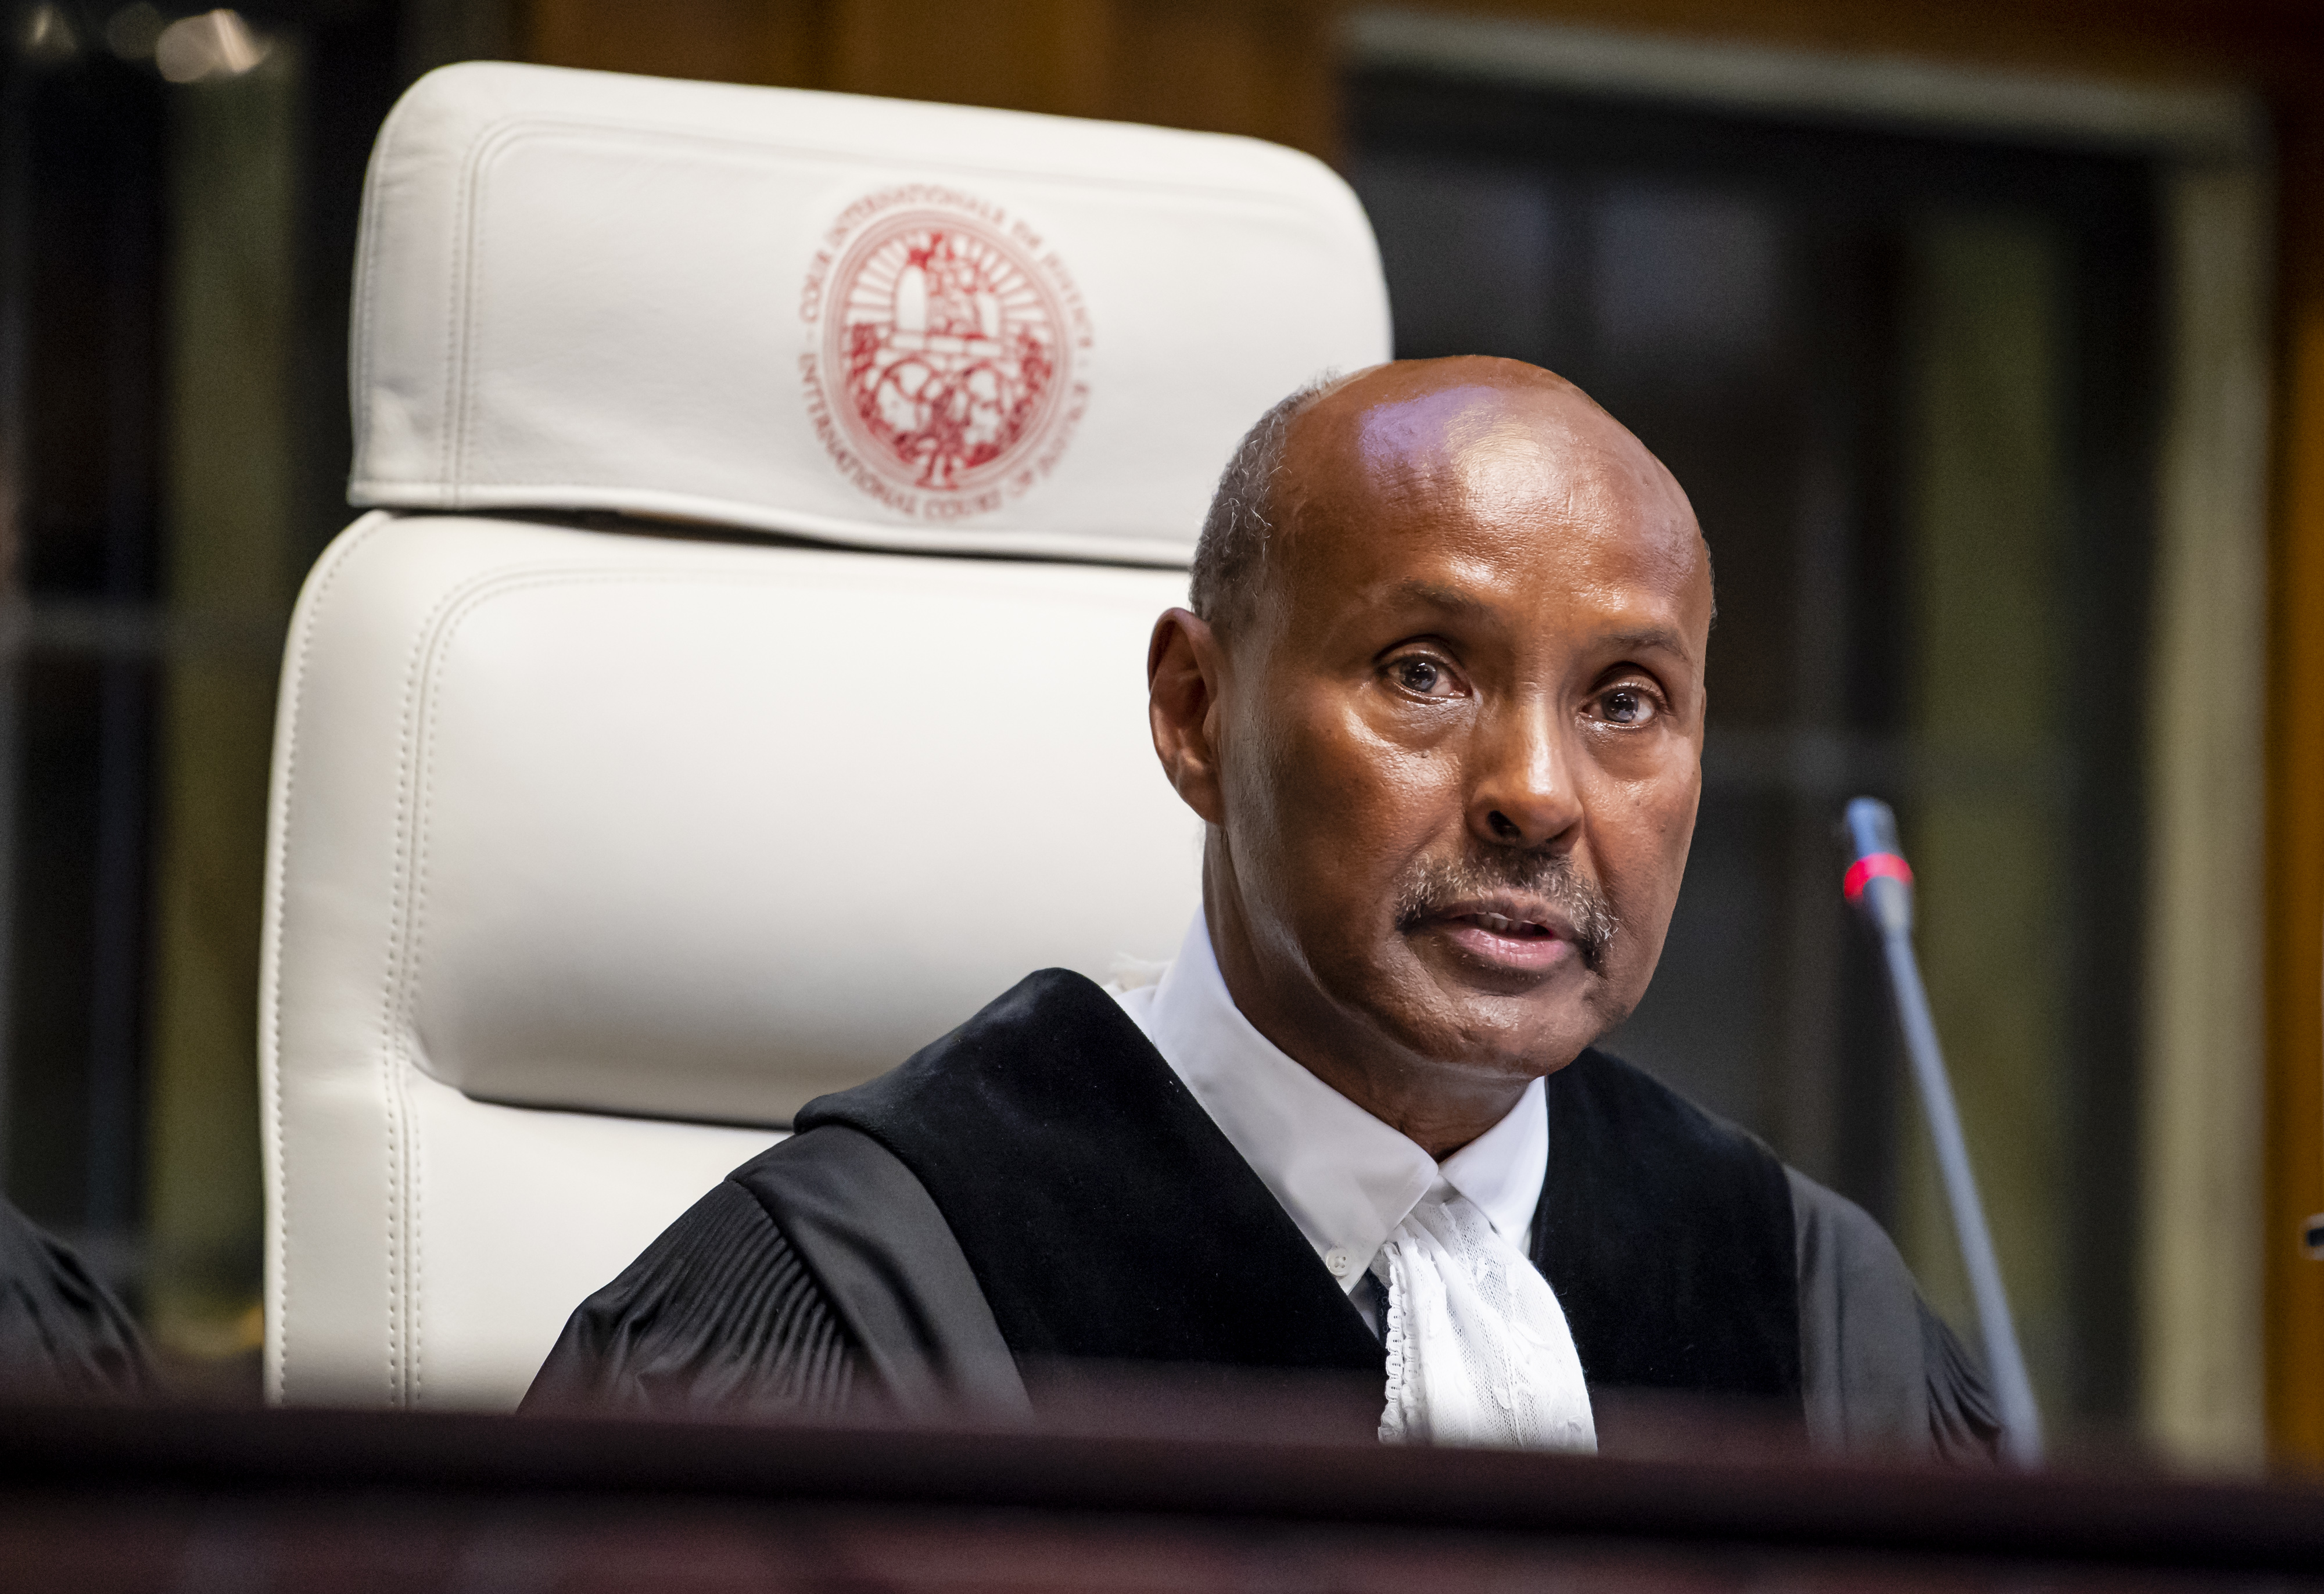 icj-and-its-order-in-the-dispute-between-islamic-republic-of-iran-and-united-states-of-america